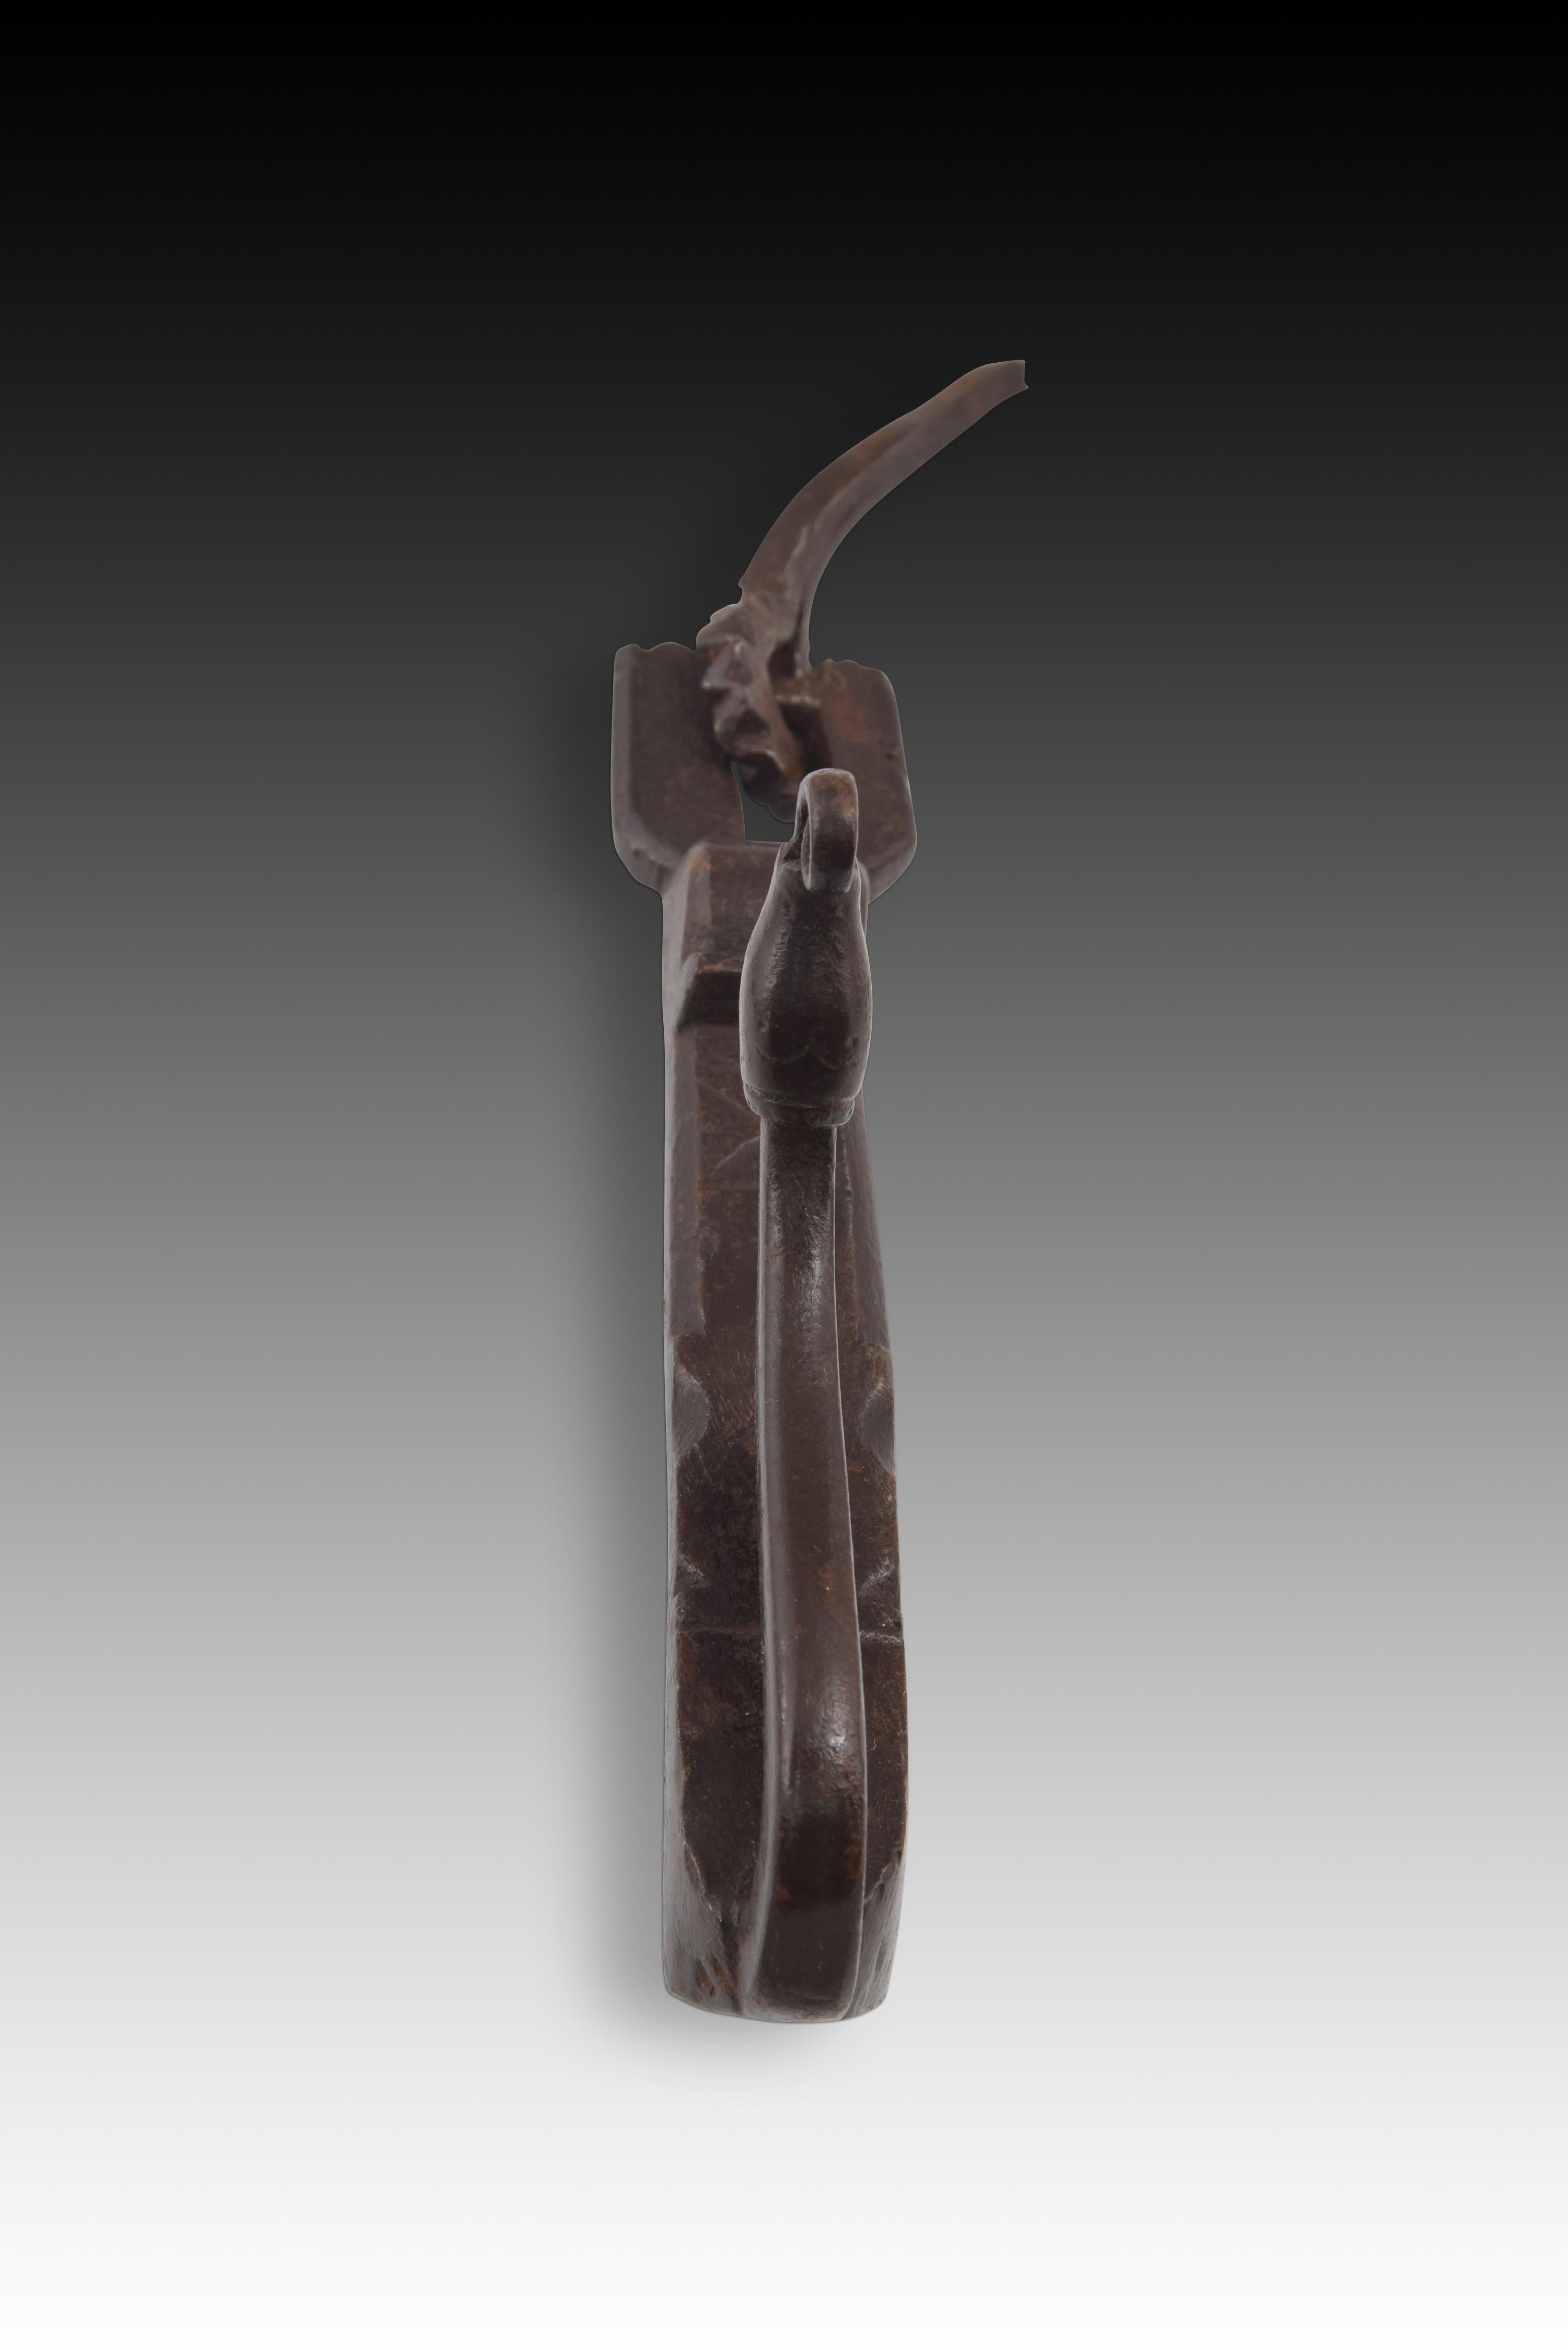 Caller with snake. wrought iron. Spanish school, 18th century. 
Caller made of wrought iron composed of two pieces. The balustrade that would join the door ends in a ring with a jagged outer edge, and from this hangs the knocker itself, a piece of